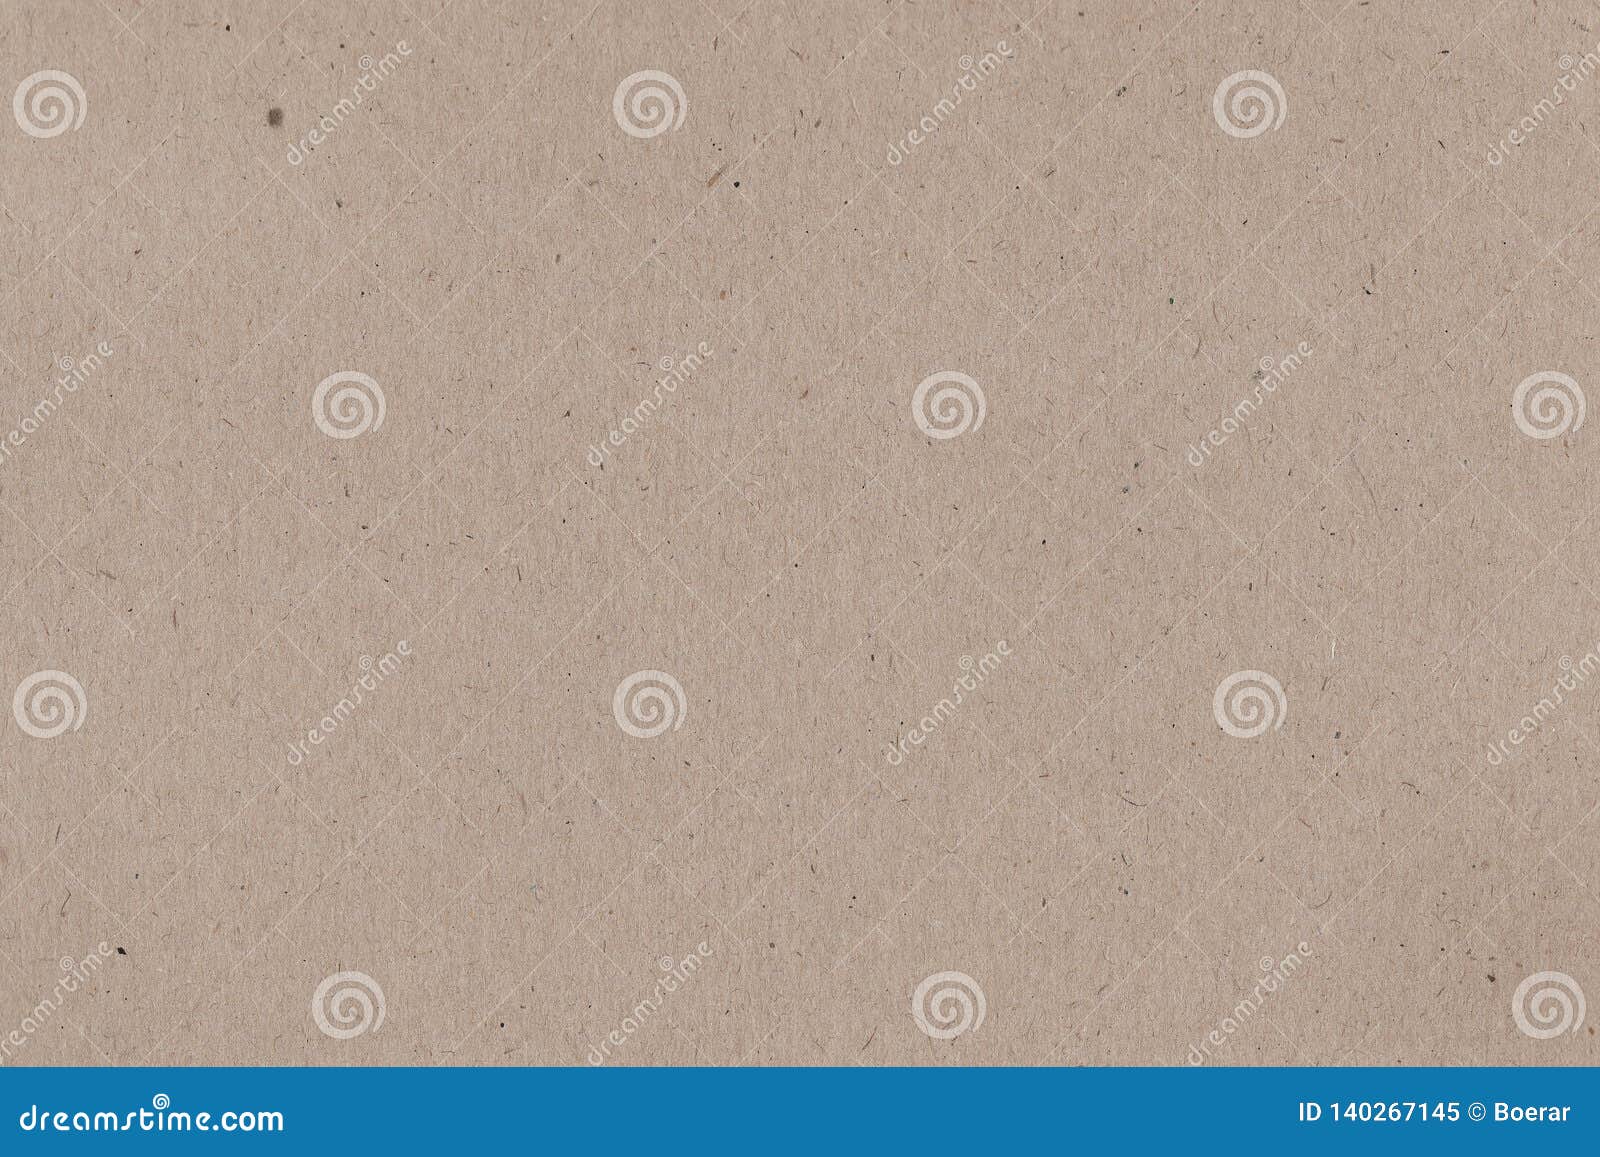 light grey plain paper package cardboard texture background